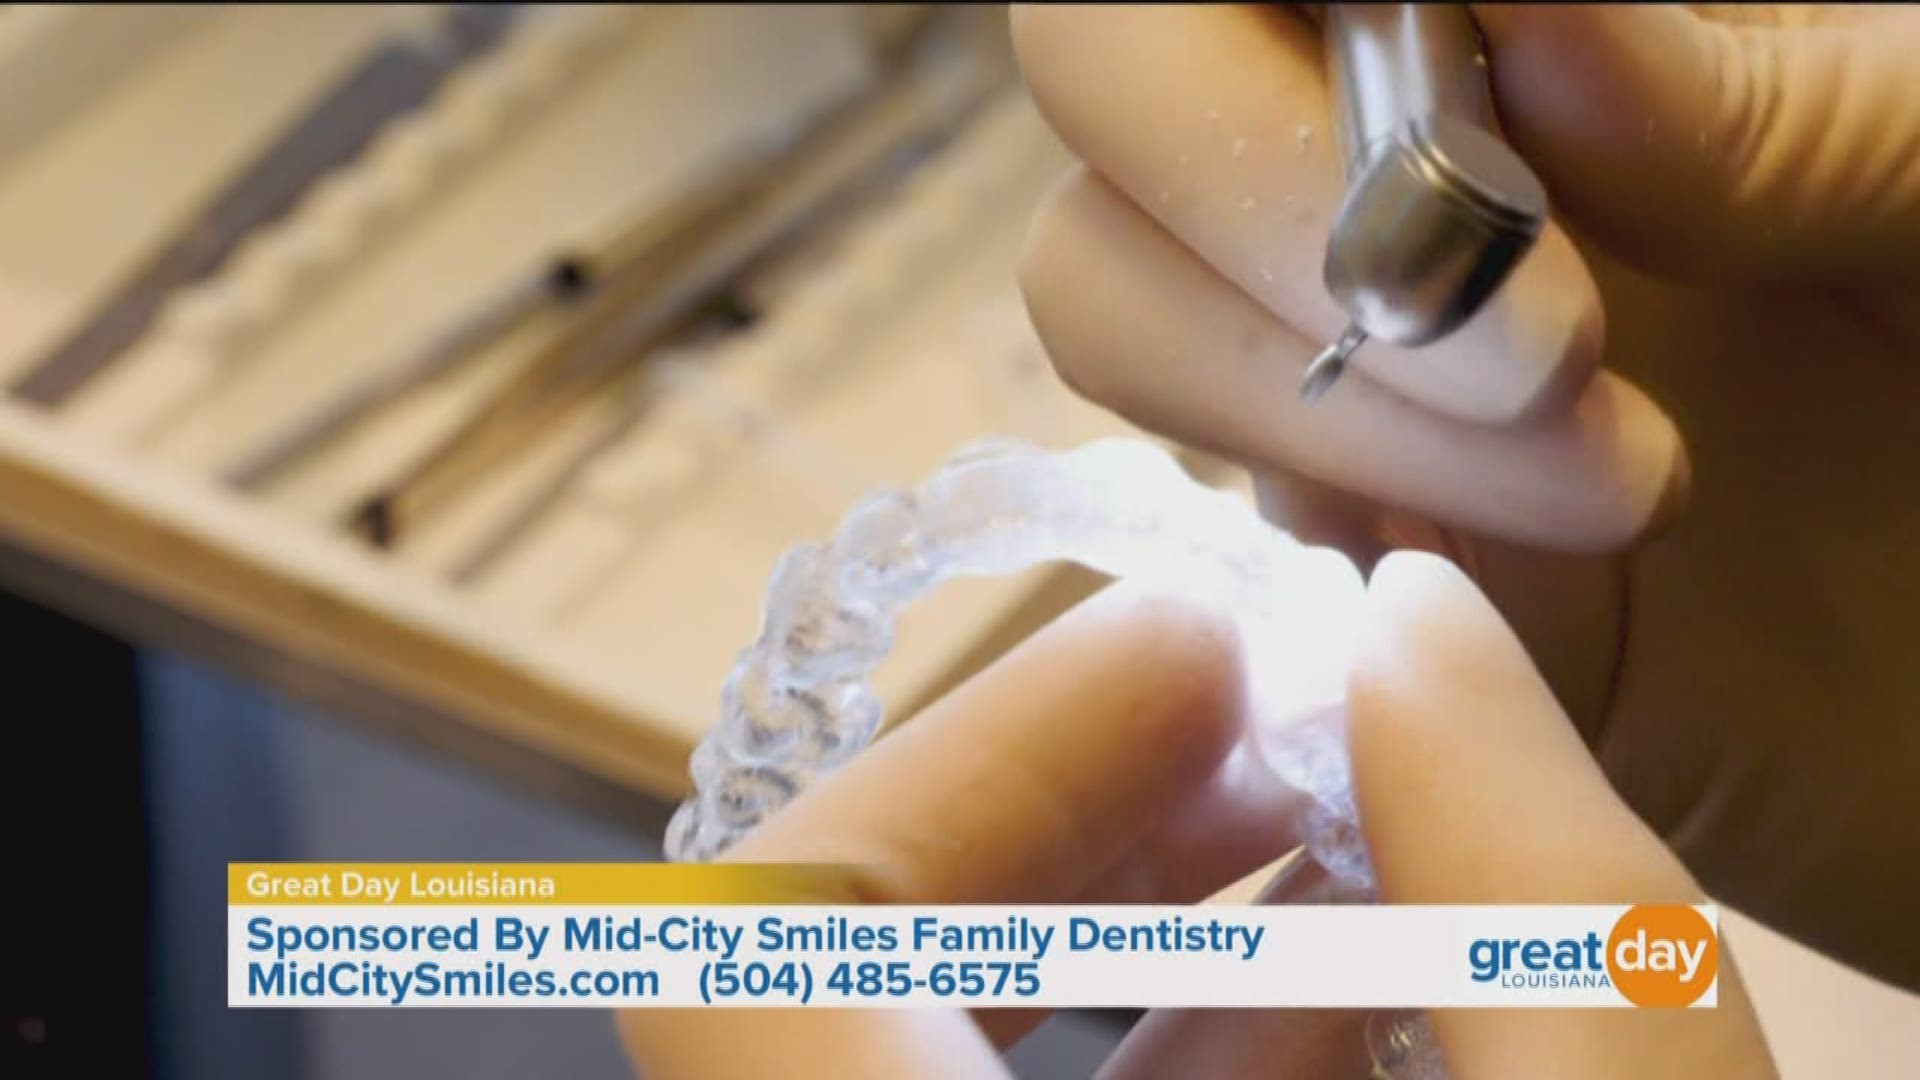 Mid-City Smiles specializes in family dentistry and provides dental care for all ages. To learn more, visit midcitysmiles.com